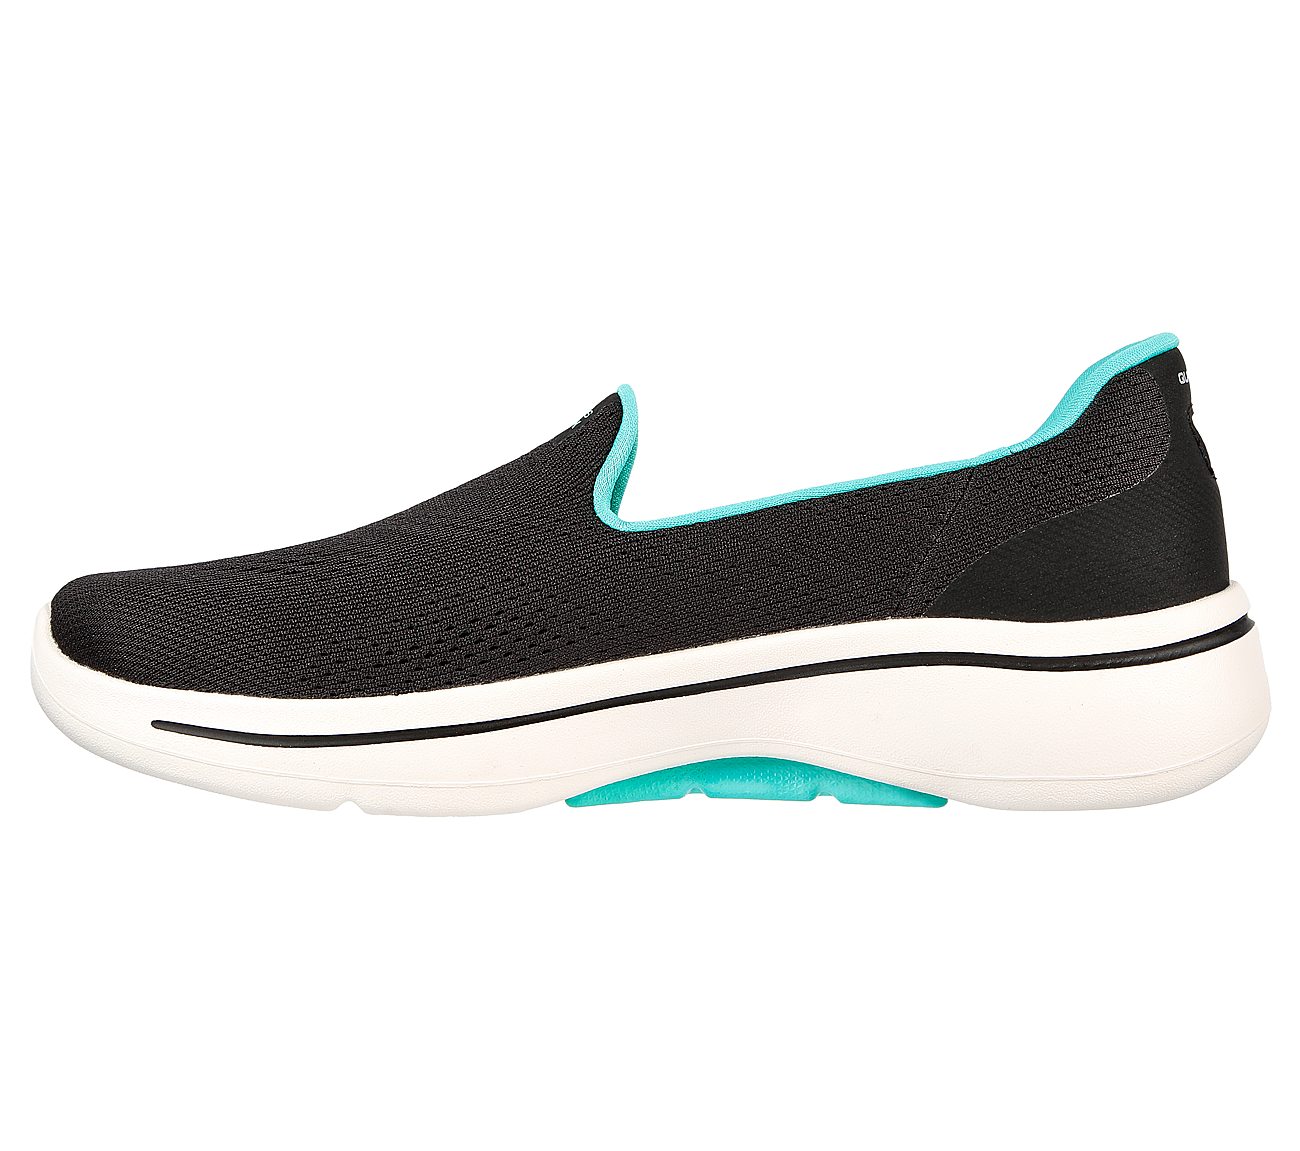 GO WALK ARCH FIT - IMAGINED, BLACK/TURQUOISE Footwear Left View